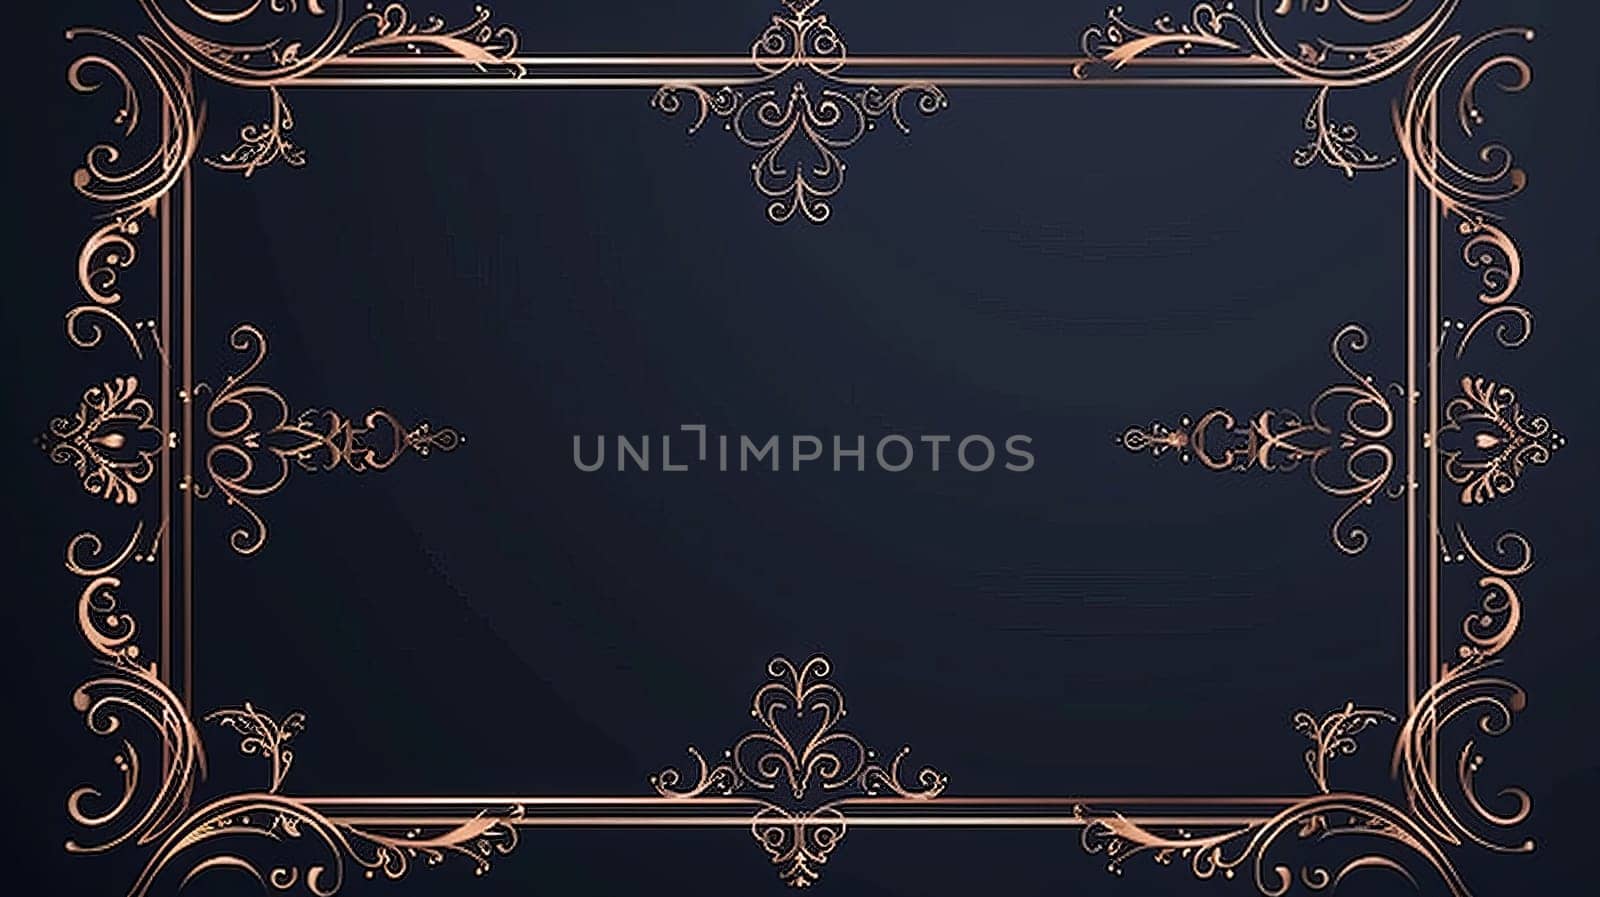 Modern illustration of an elegant art nouveau classic antique design with rose gold lines gradient and frame. Premium design illustration for a gala, grand opening, art deco event, etc.